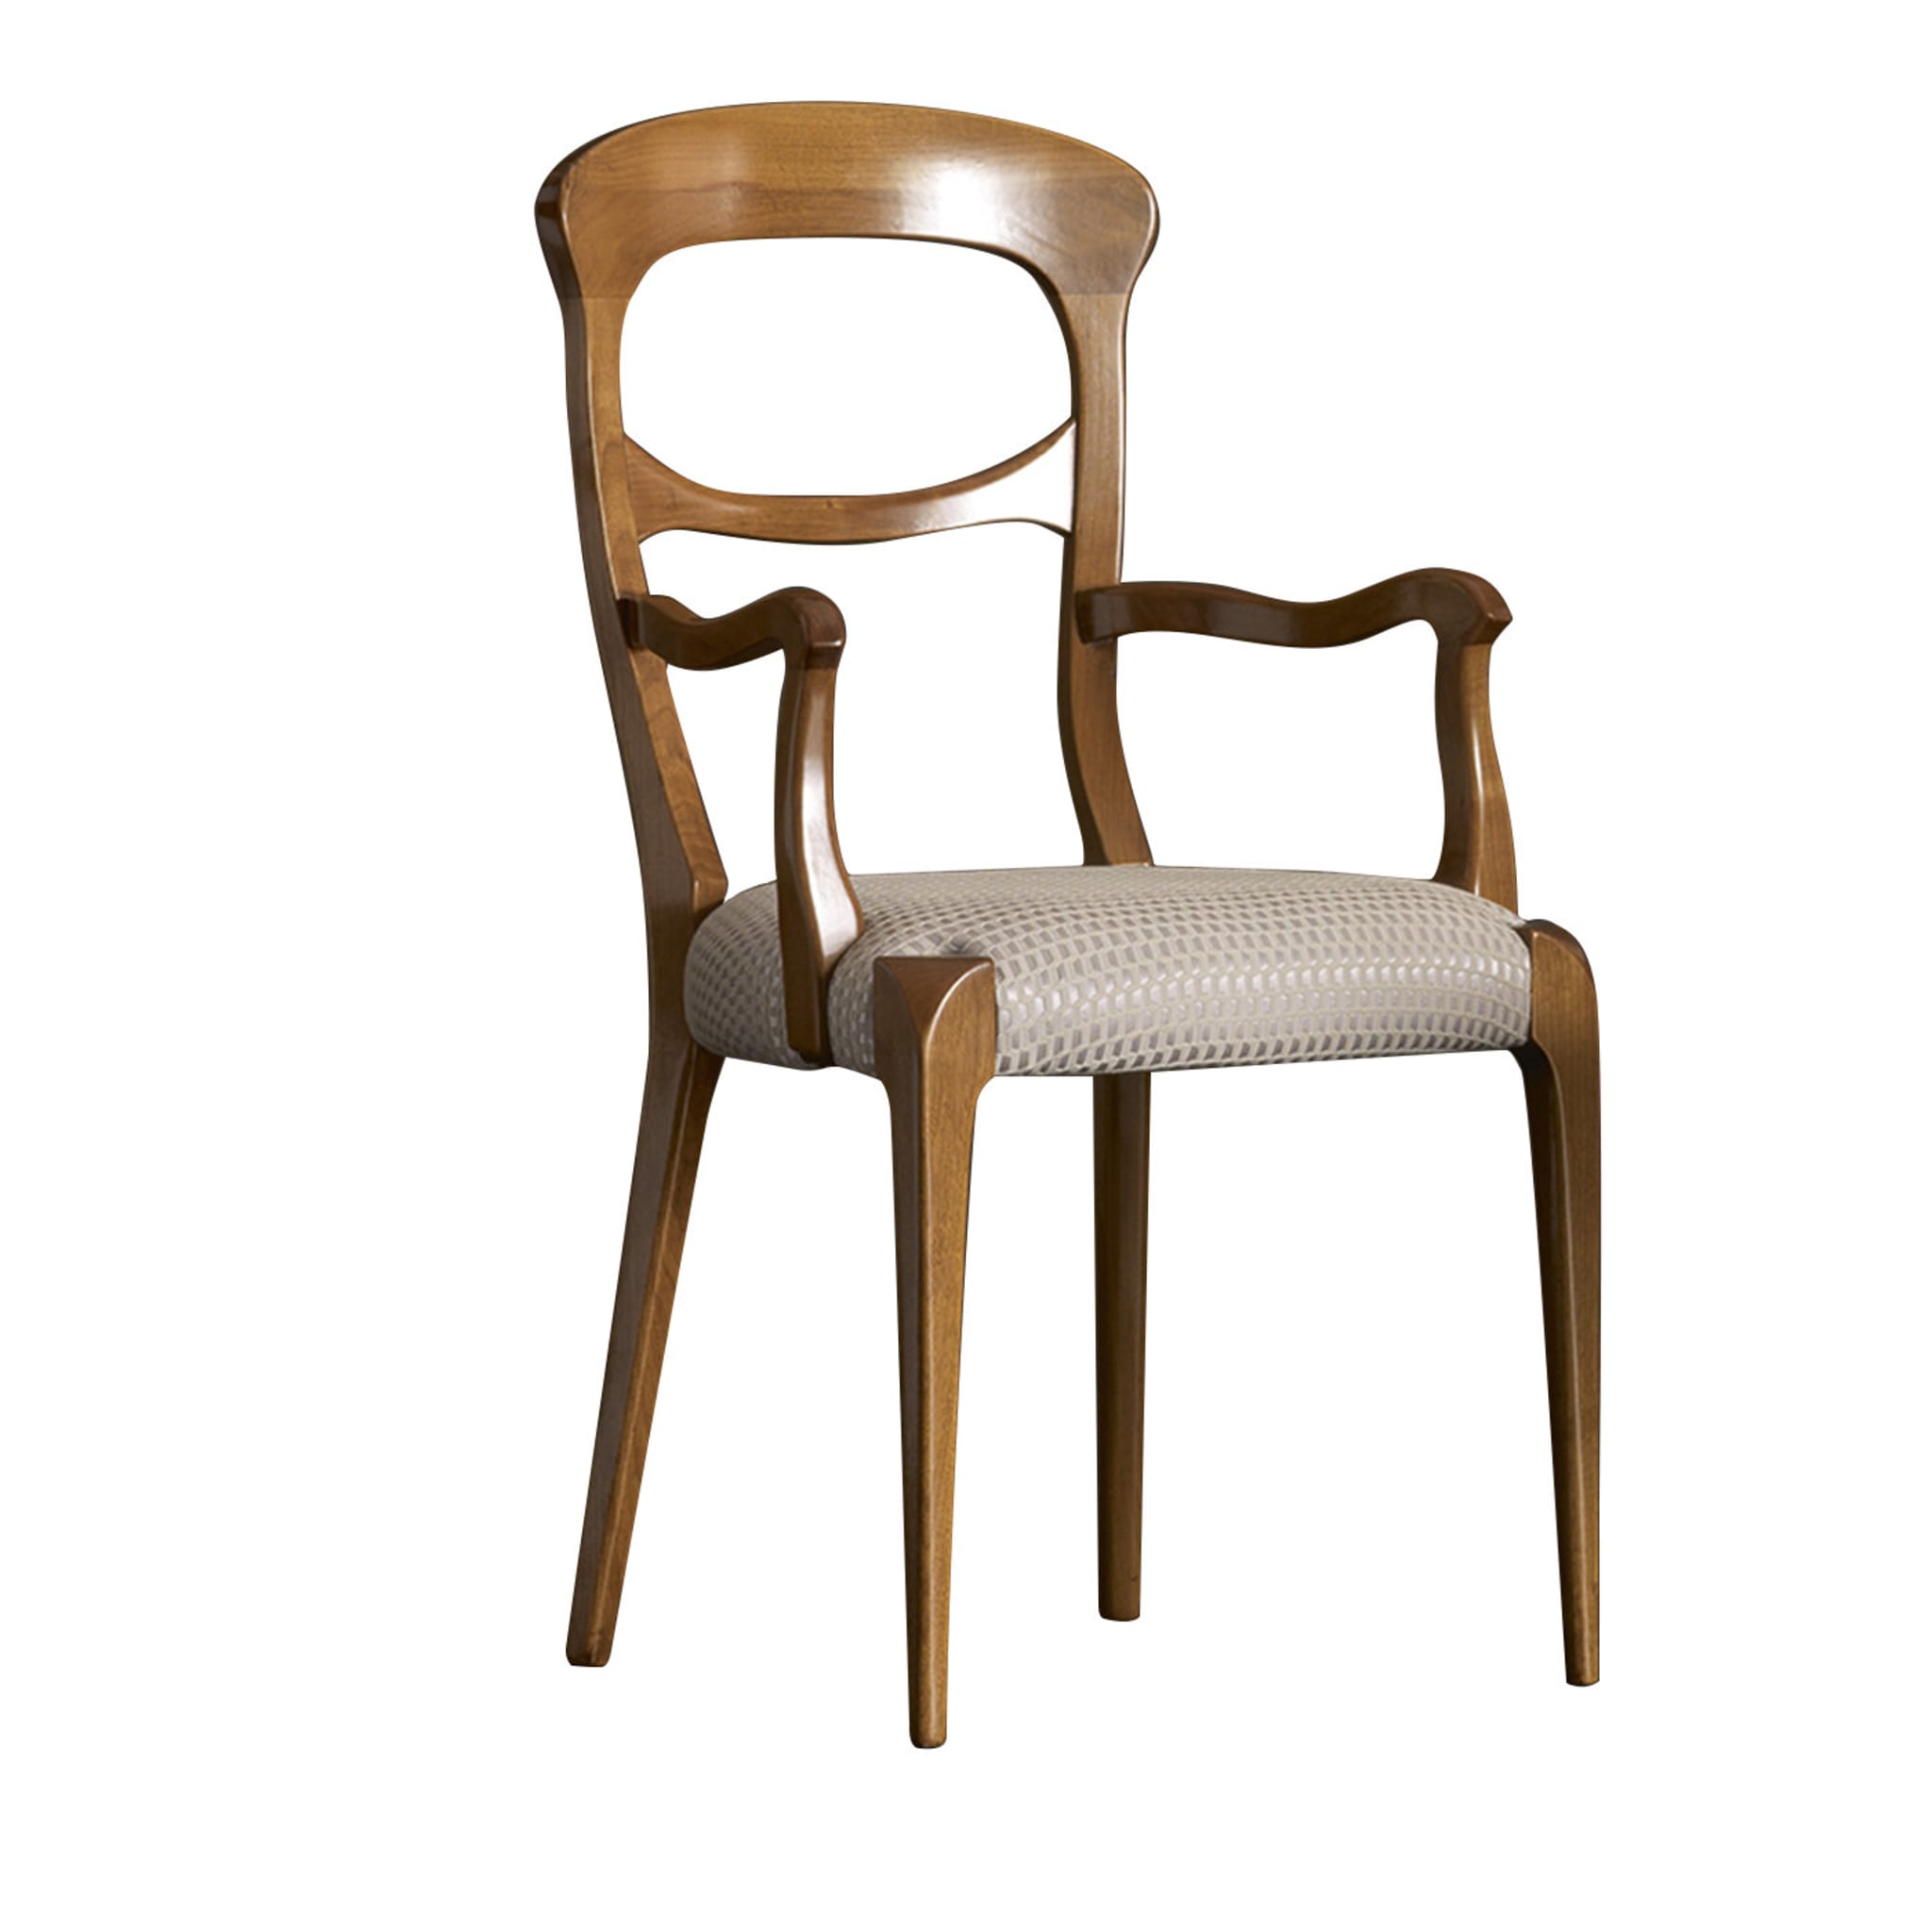 Oleandro Chair - Main view